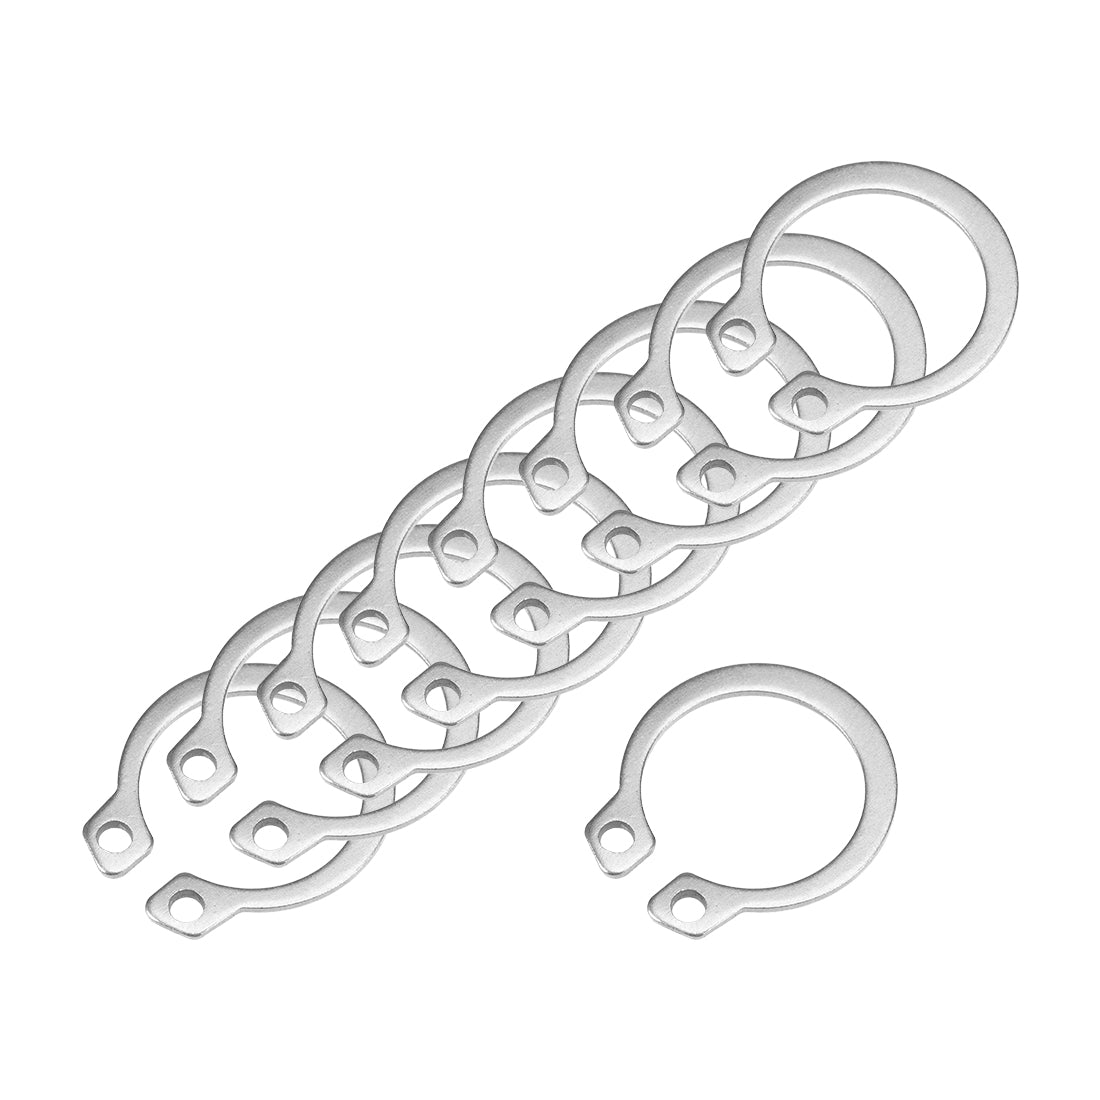 uxcell Uxcell 17mm External Circlips Retaining Shaft Snap Rings 304 Stainless Steel 50pcs